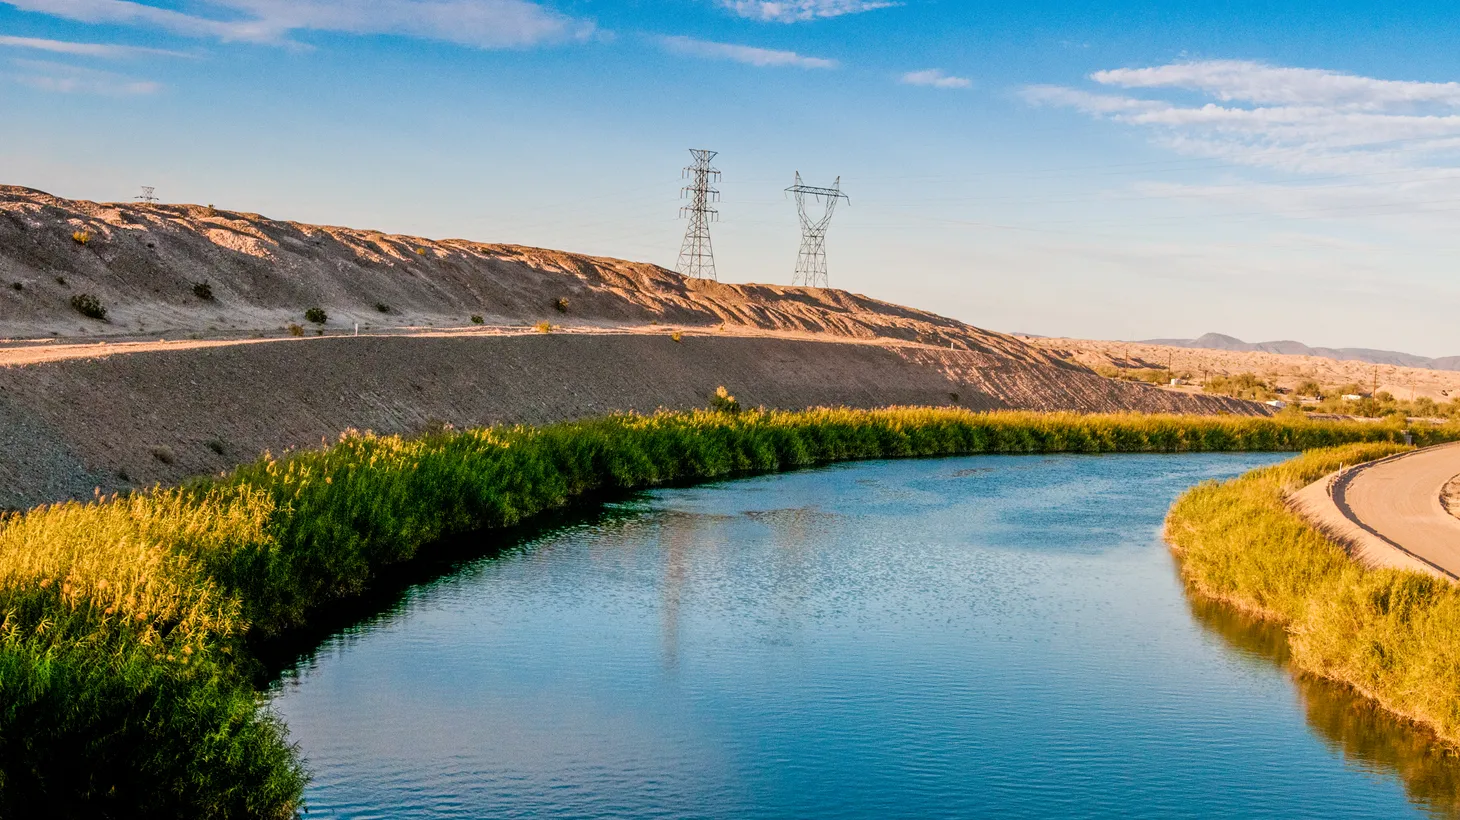 “California said that they would take voluntary cuts to the tune of 400,000 acre feet a year for the next three years,” Professor Elizabeth A. Koebele says of the Golden State reducing its water use from the Colorado River.